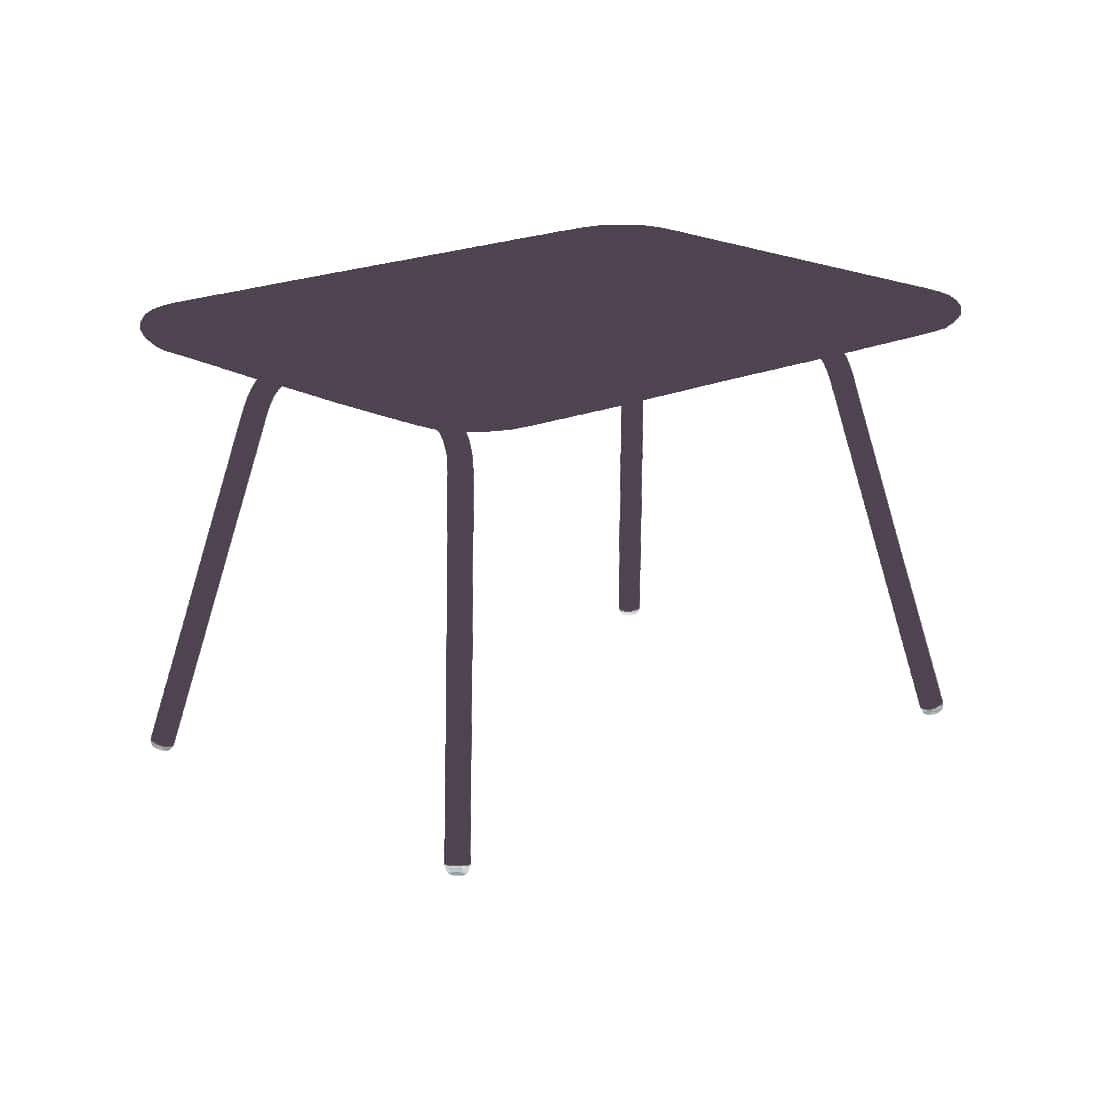 LUXEMBOURG KID / 4107 TABLE 76 X 55.5CM